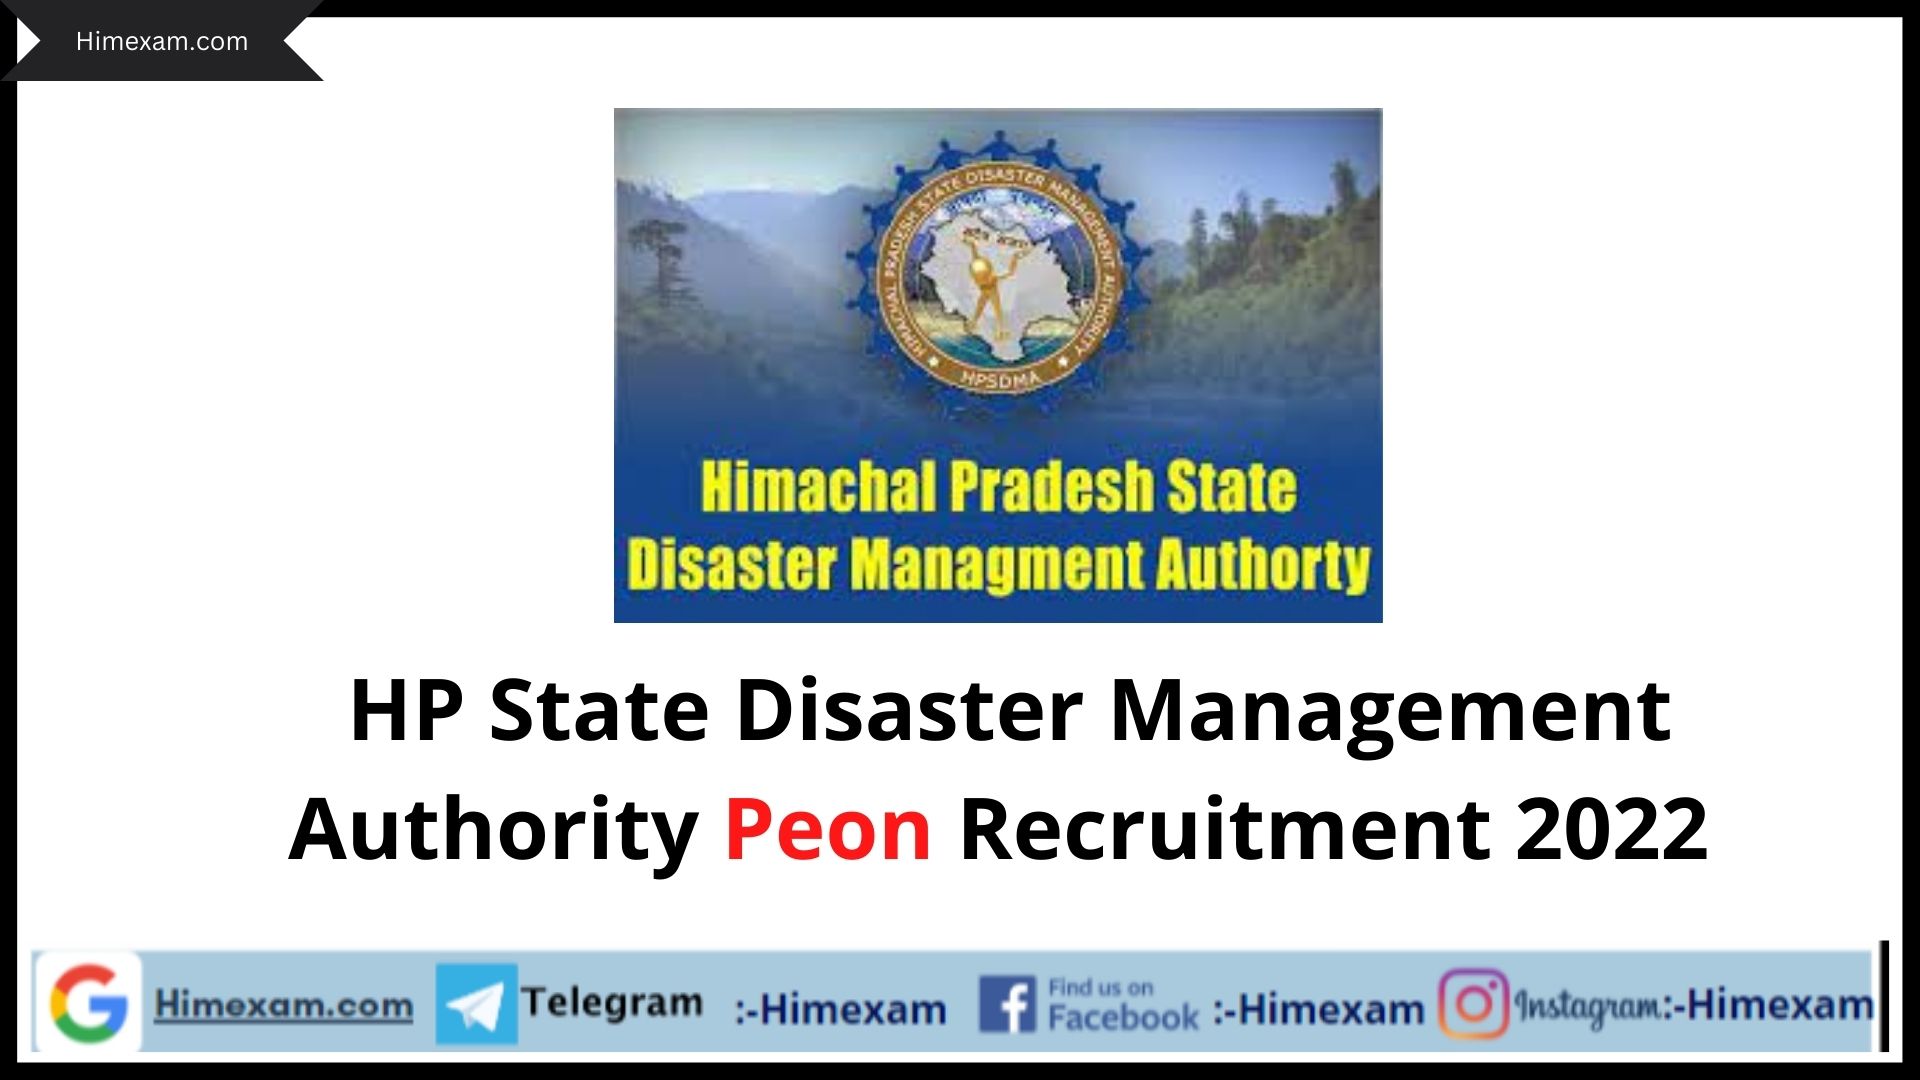 HP State Disaster Management Authority Peon Recruitment 2022